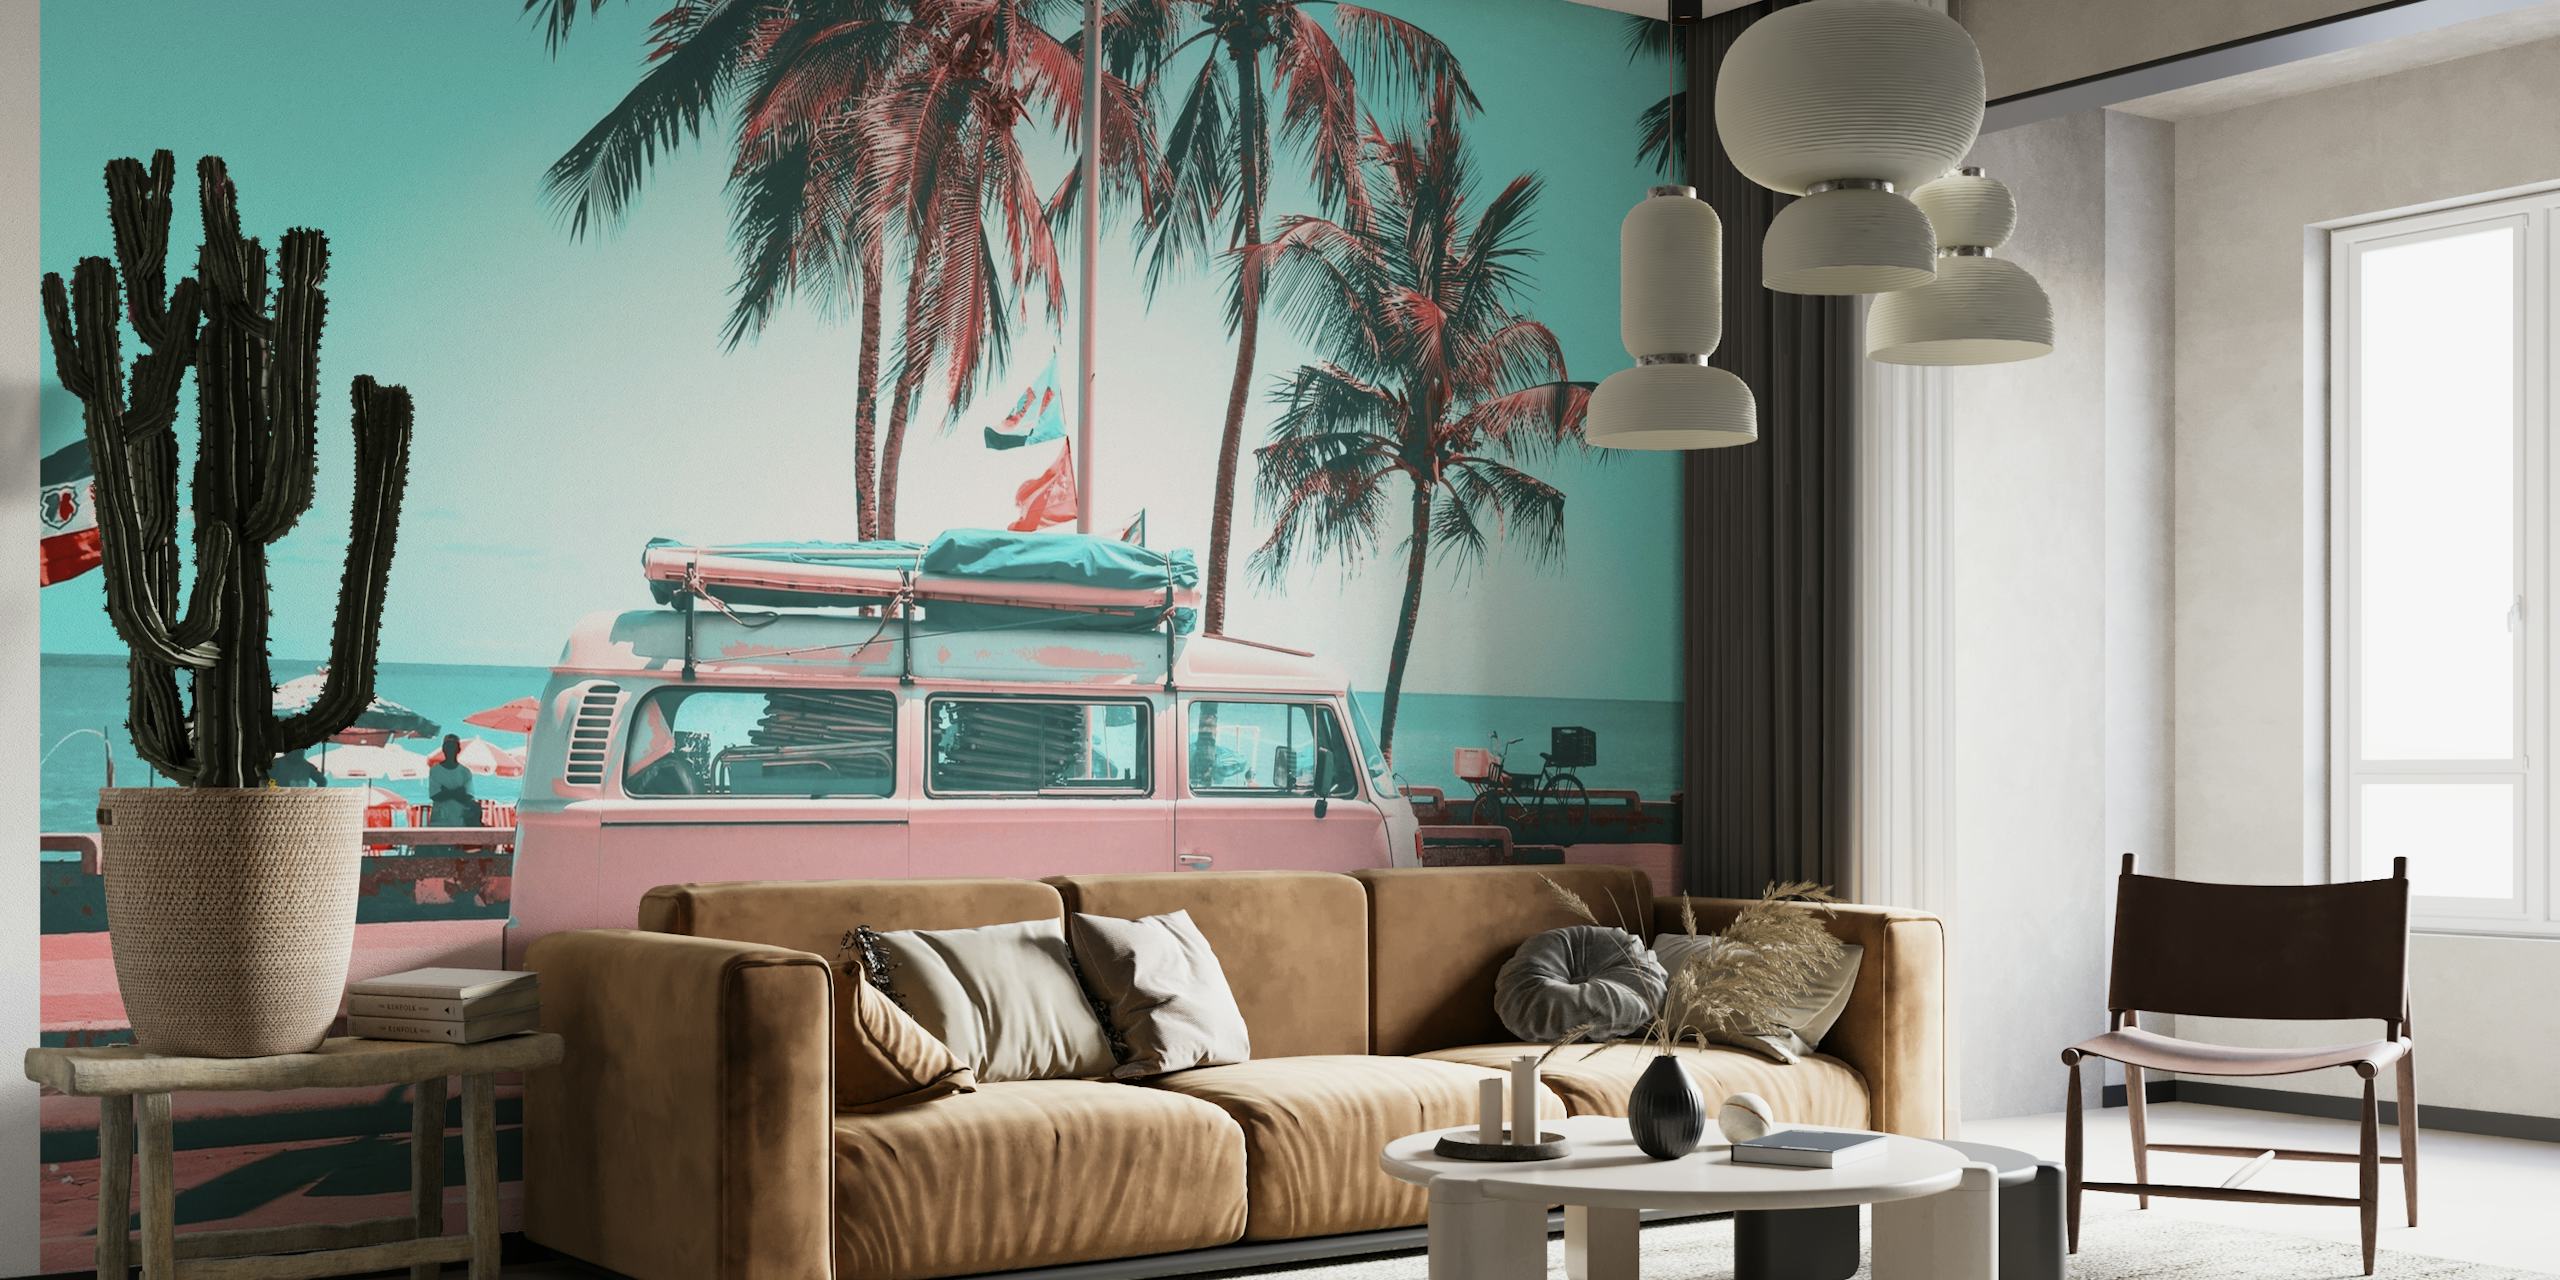 Retro-style van under palm trees wall mural on happywall.com